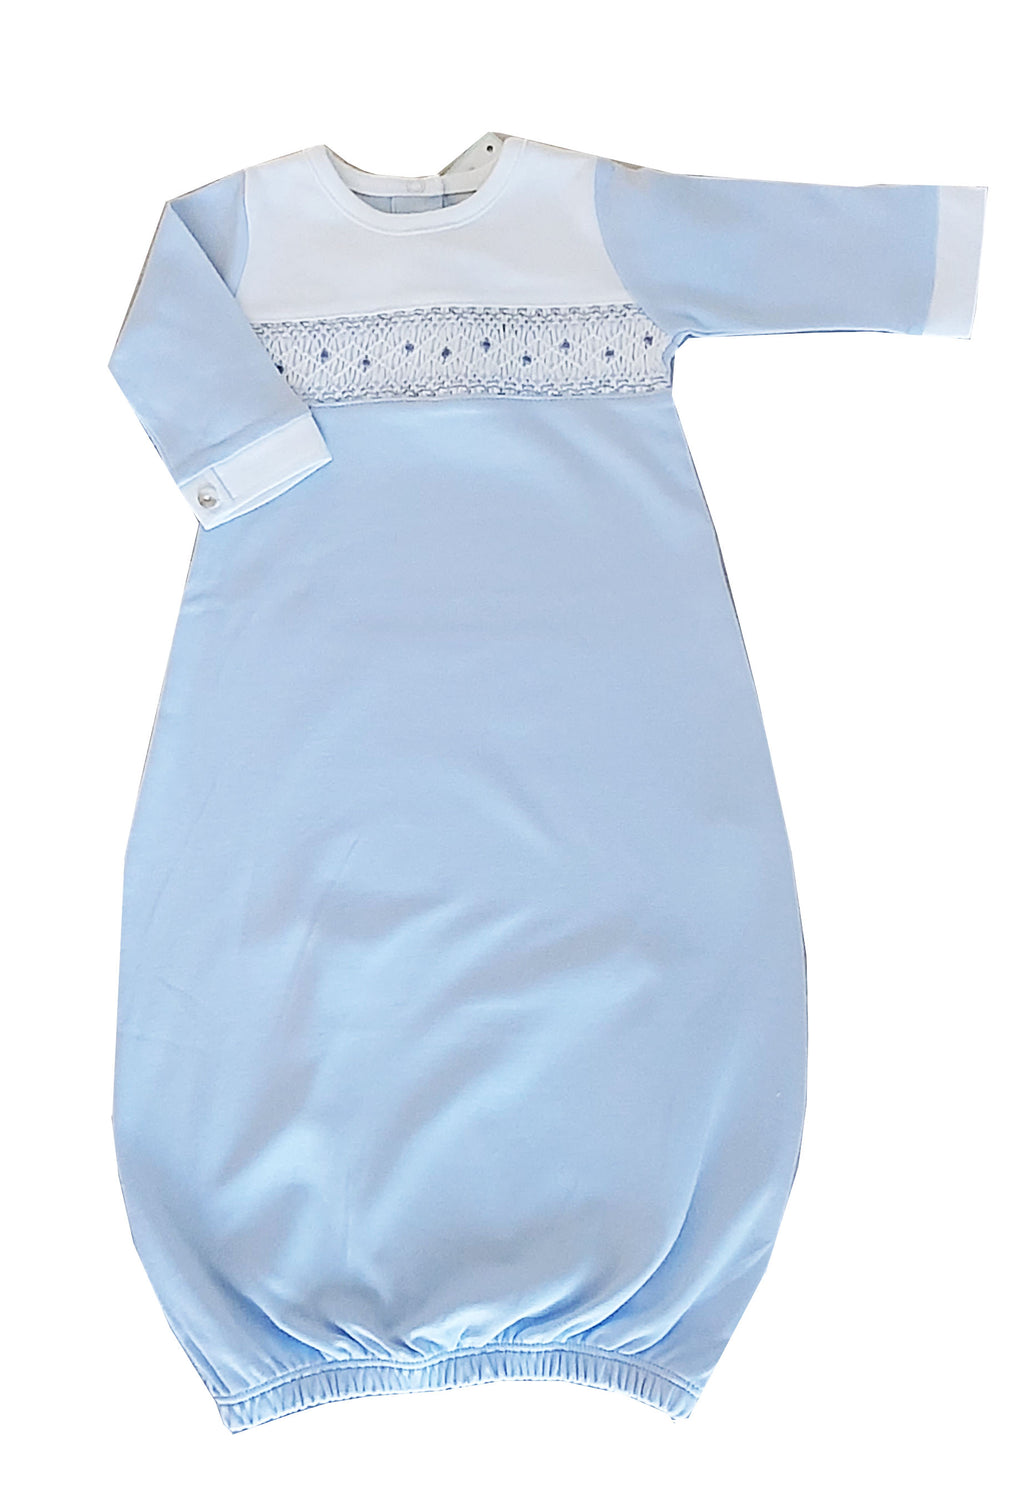 Isaac Baby Boy hand smocked blue daygown - Little Threads Inc. Children's Clothing